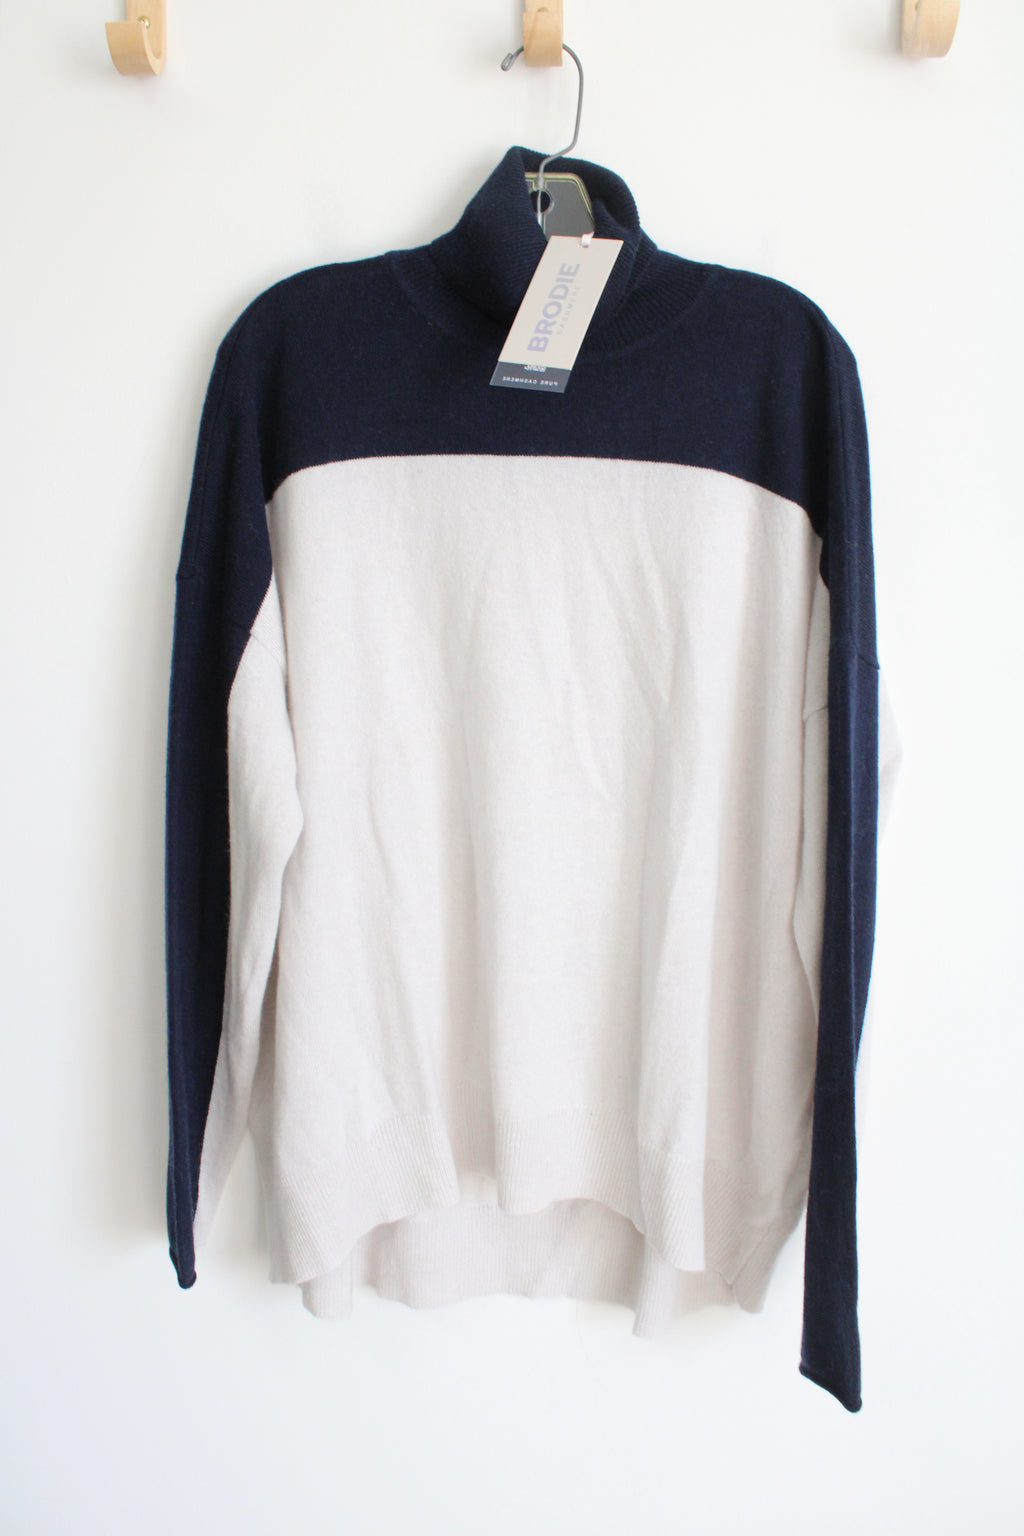 NEW Brodie Cashmere Navy & White Colorblocked Knit Turtleneck Sweater | XL